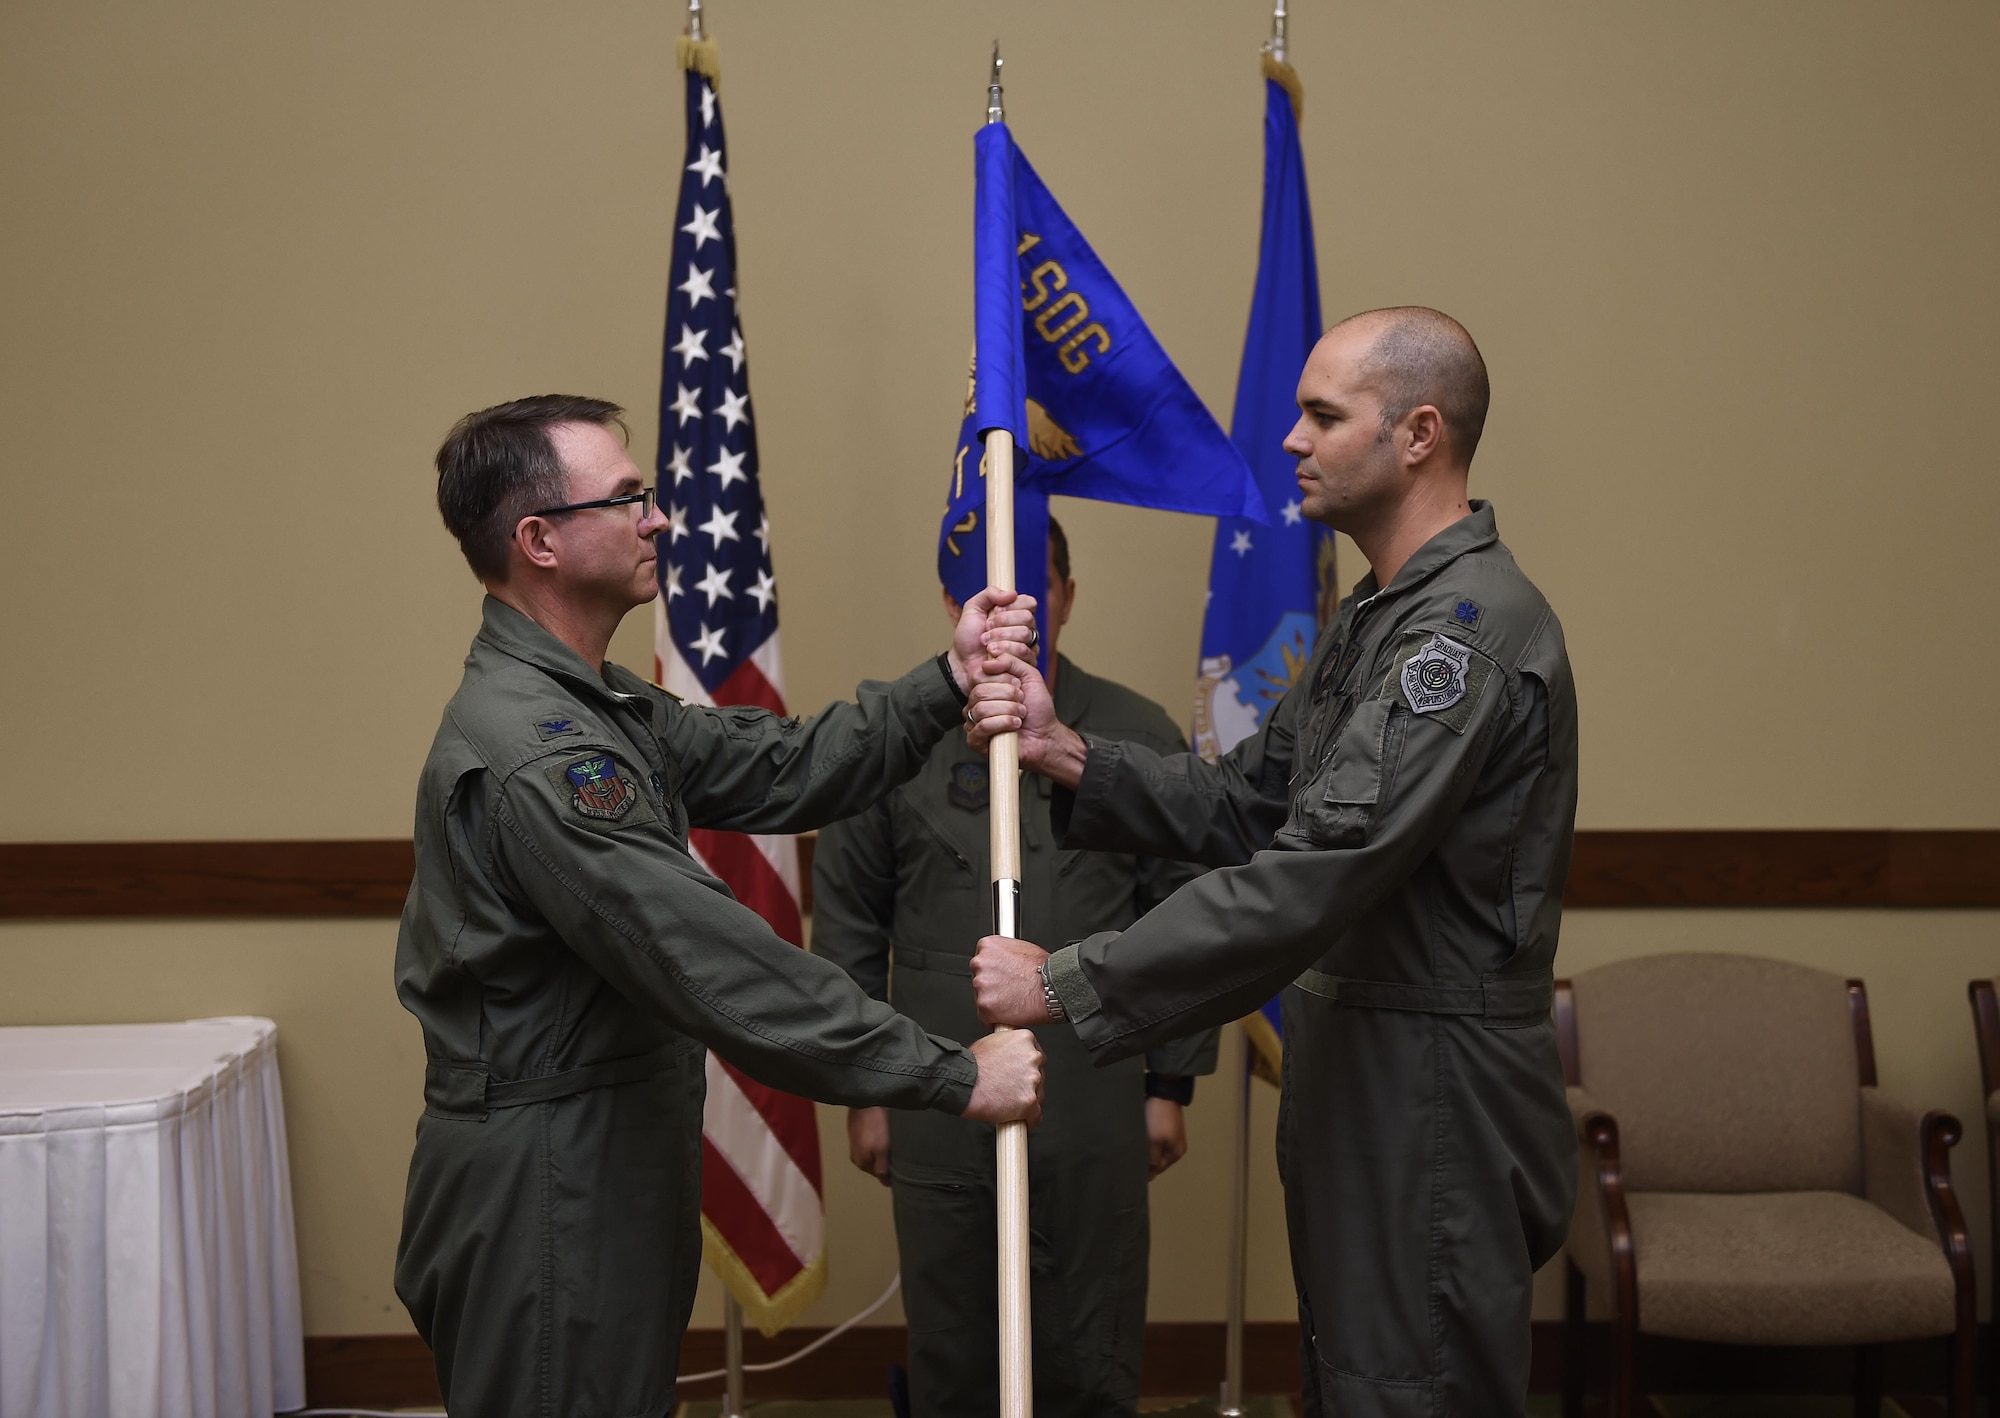 Col. Stewart Hammons, 1st Special Operations Group commander, passes the Detachment 2 guidon to Lt. Col. Bret DeAngelis, DET 2 commander, during an activation ceremony at the Hurlburt Field, Fla., July 10, 2015. DET 2 was activated to operationally test the AC-130J Ghostrider gunship, train aircrews, as well as develop new tactics, techniques and procedures for the aircraft. (U.S. Air Force photos by Airman Kai White/Released)